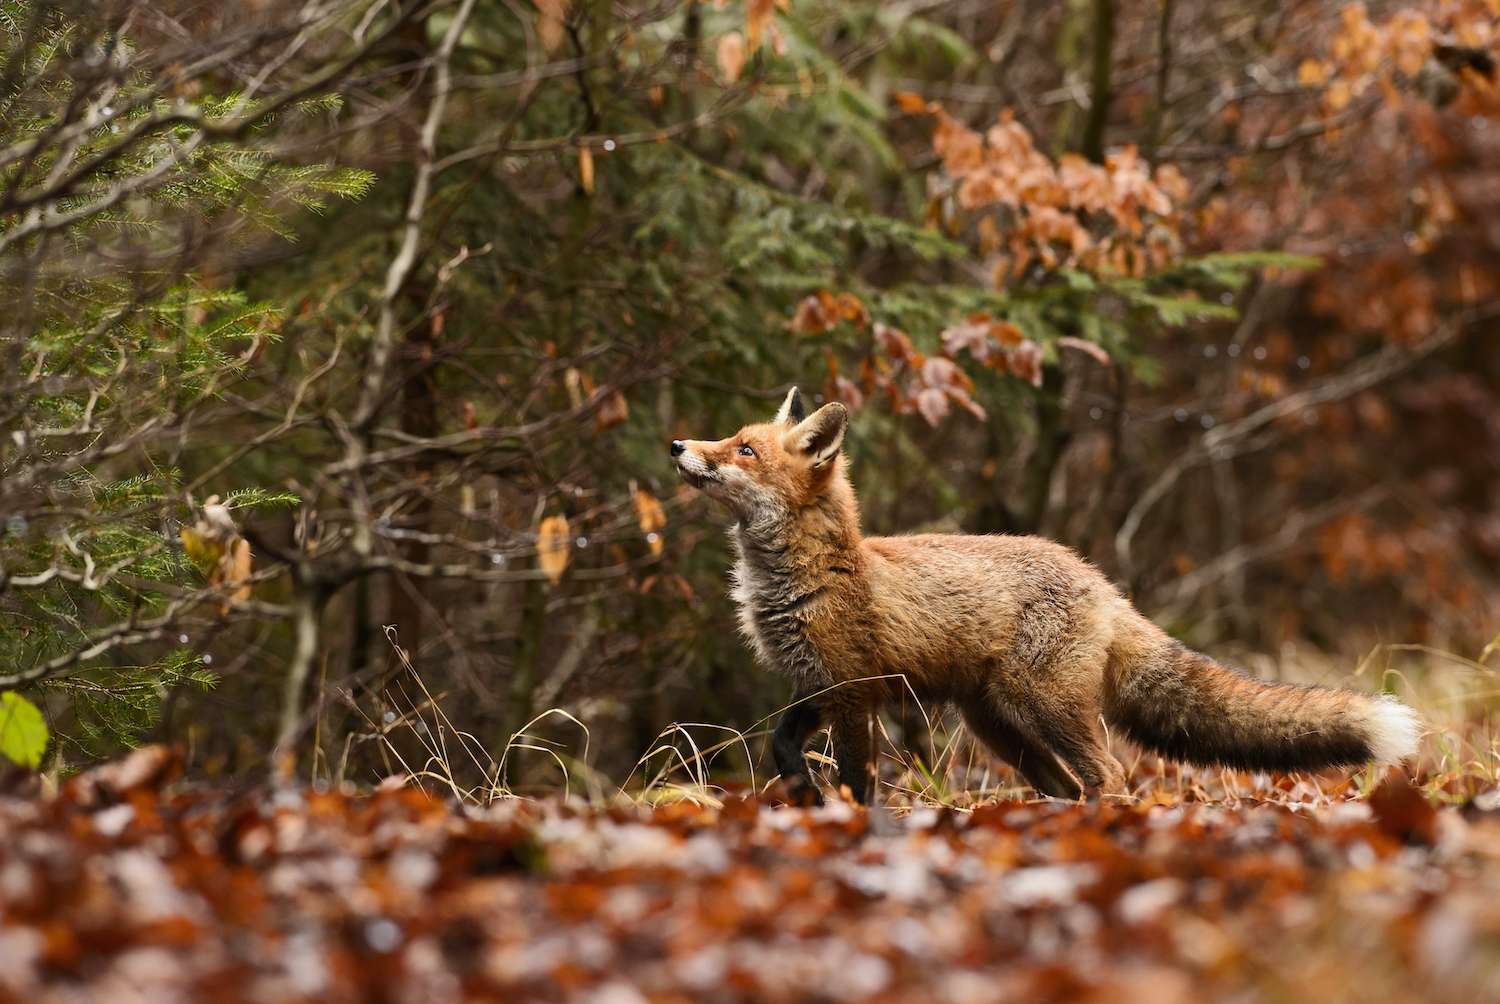 Red Fox in Slovenia near a tree with many fallen leaves 